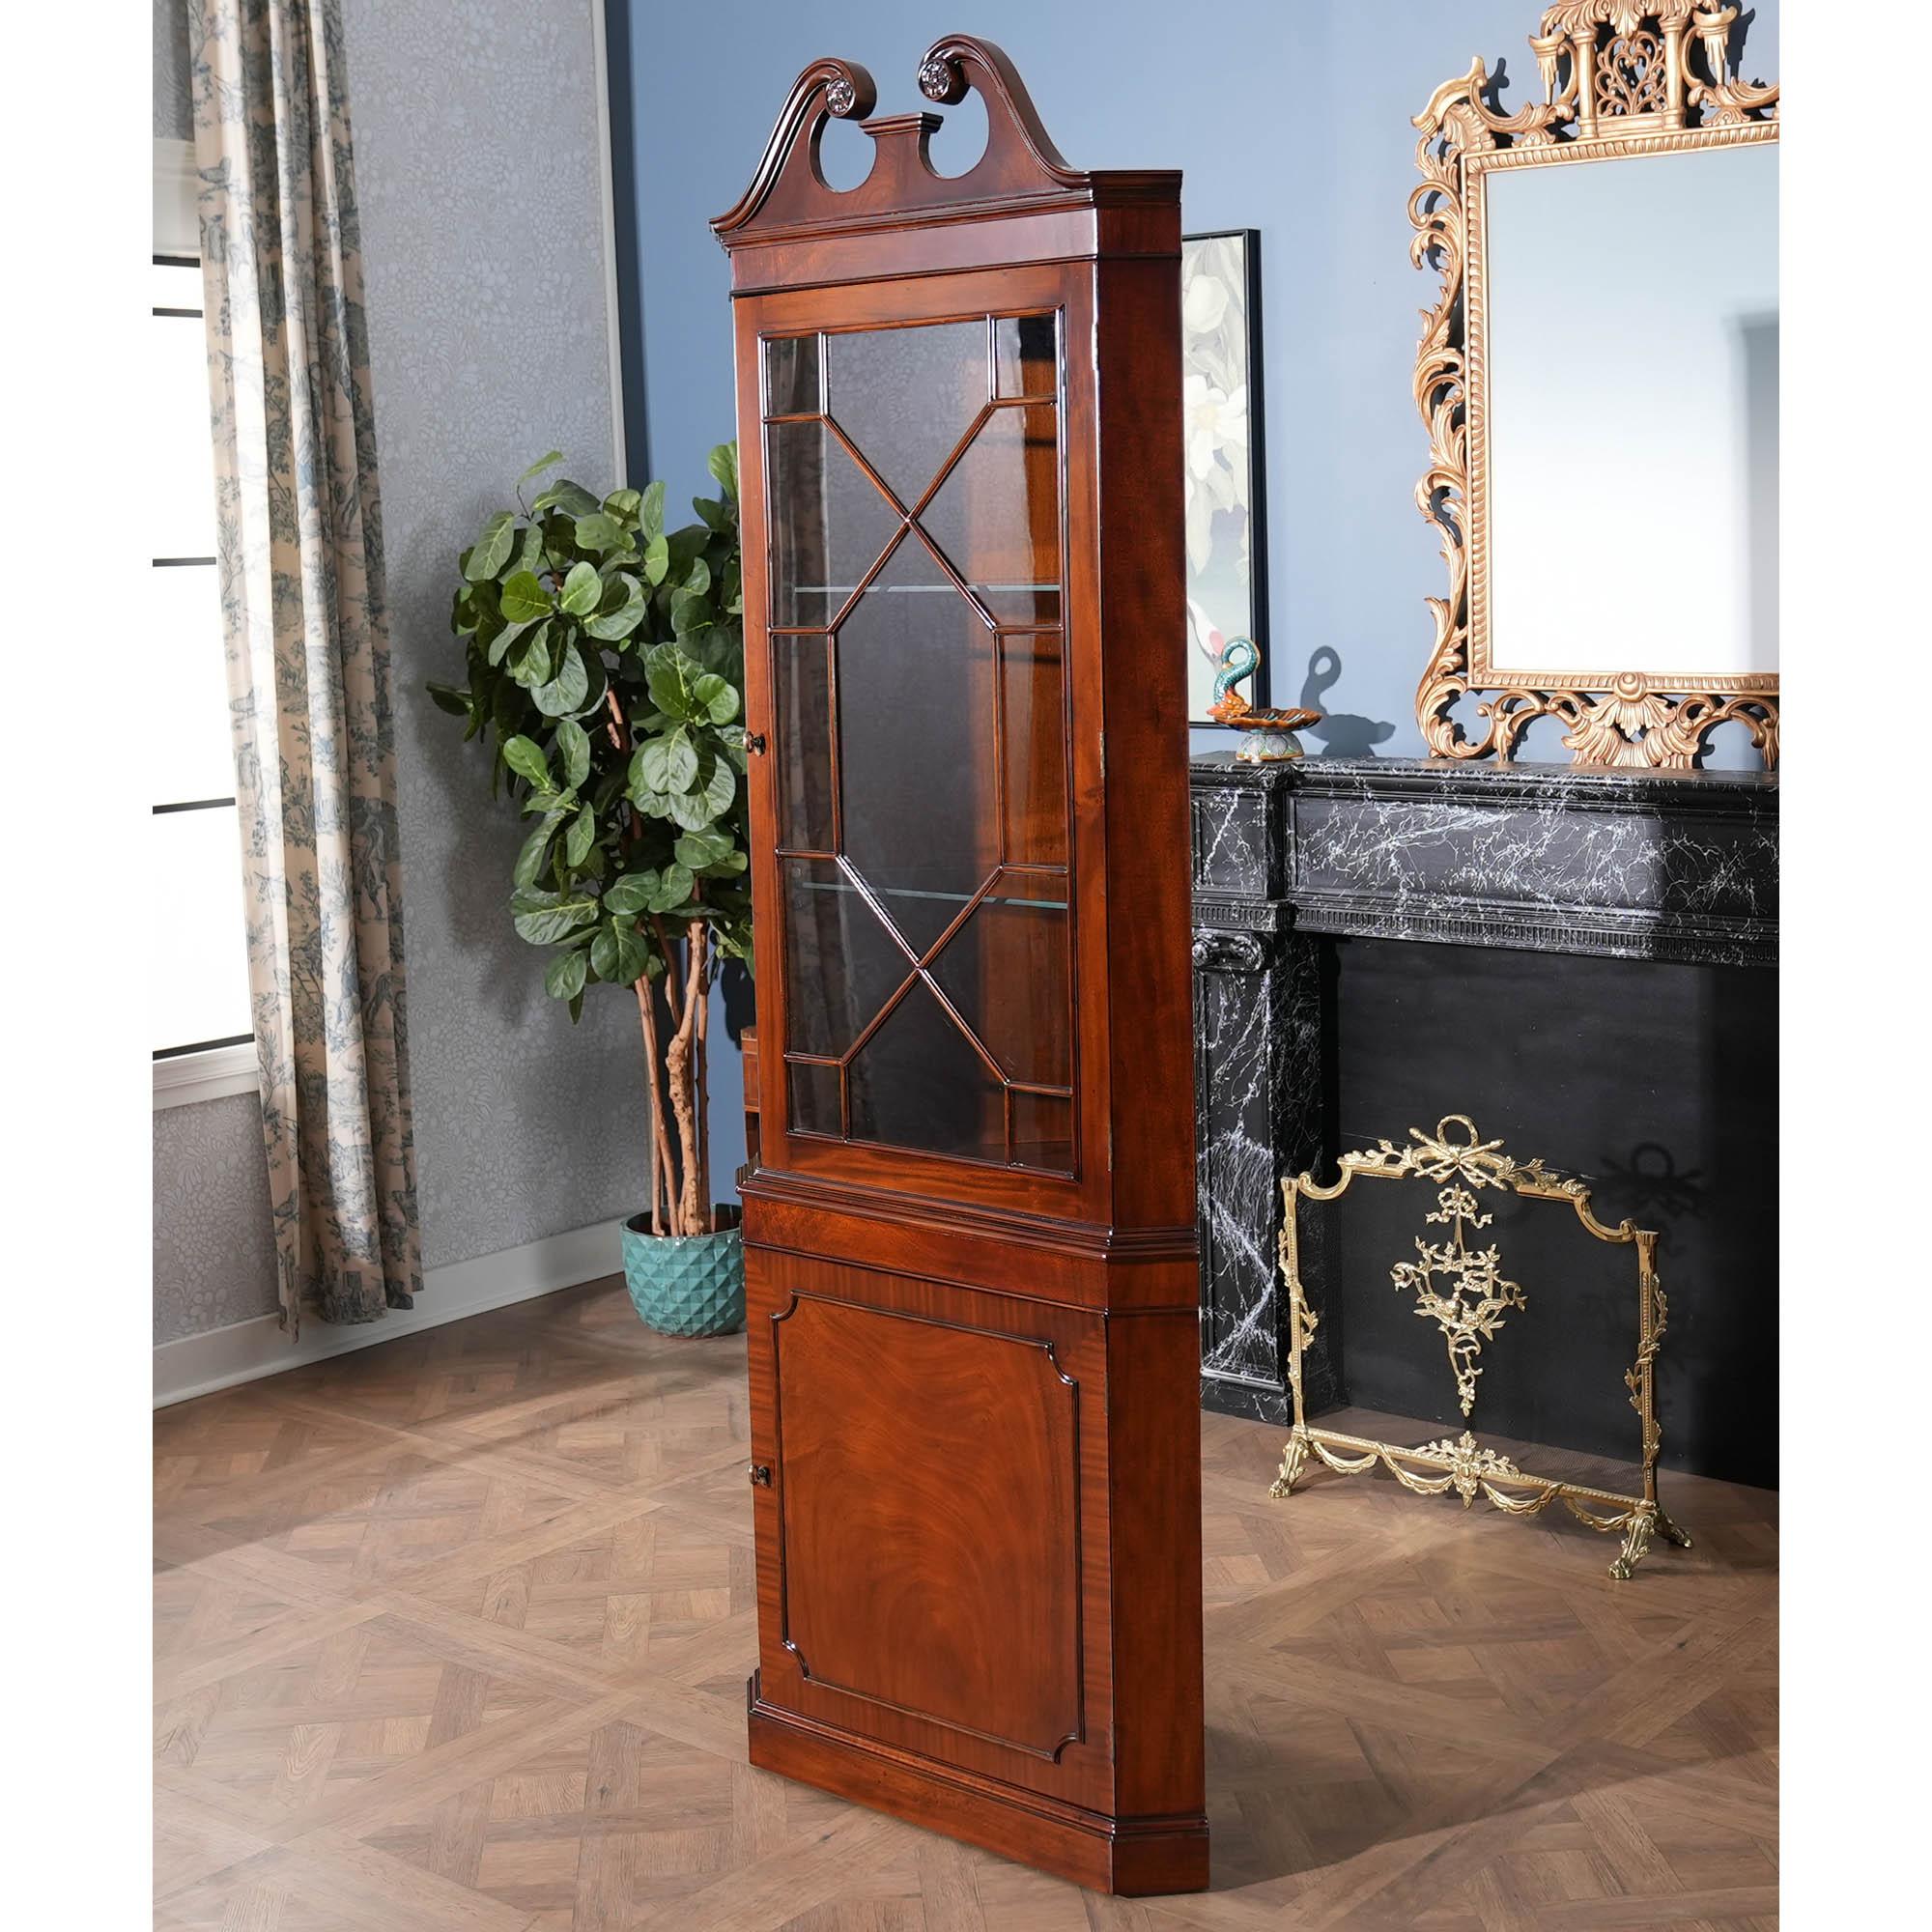 Mahogany Corner Cabinet In New Condition For Sale In Annville, PA